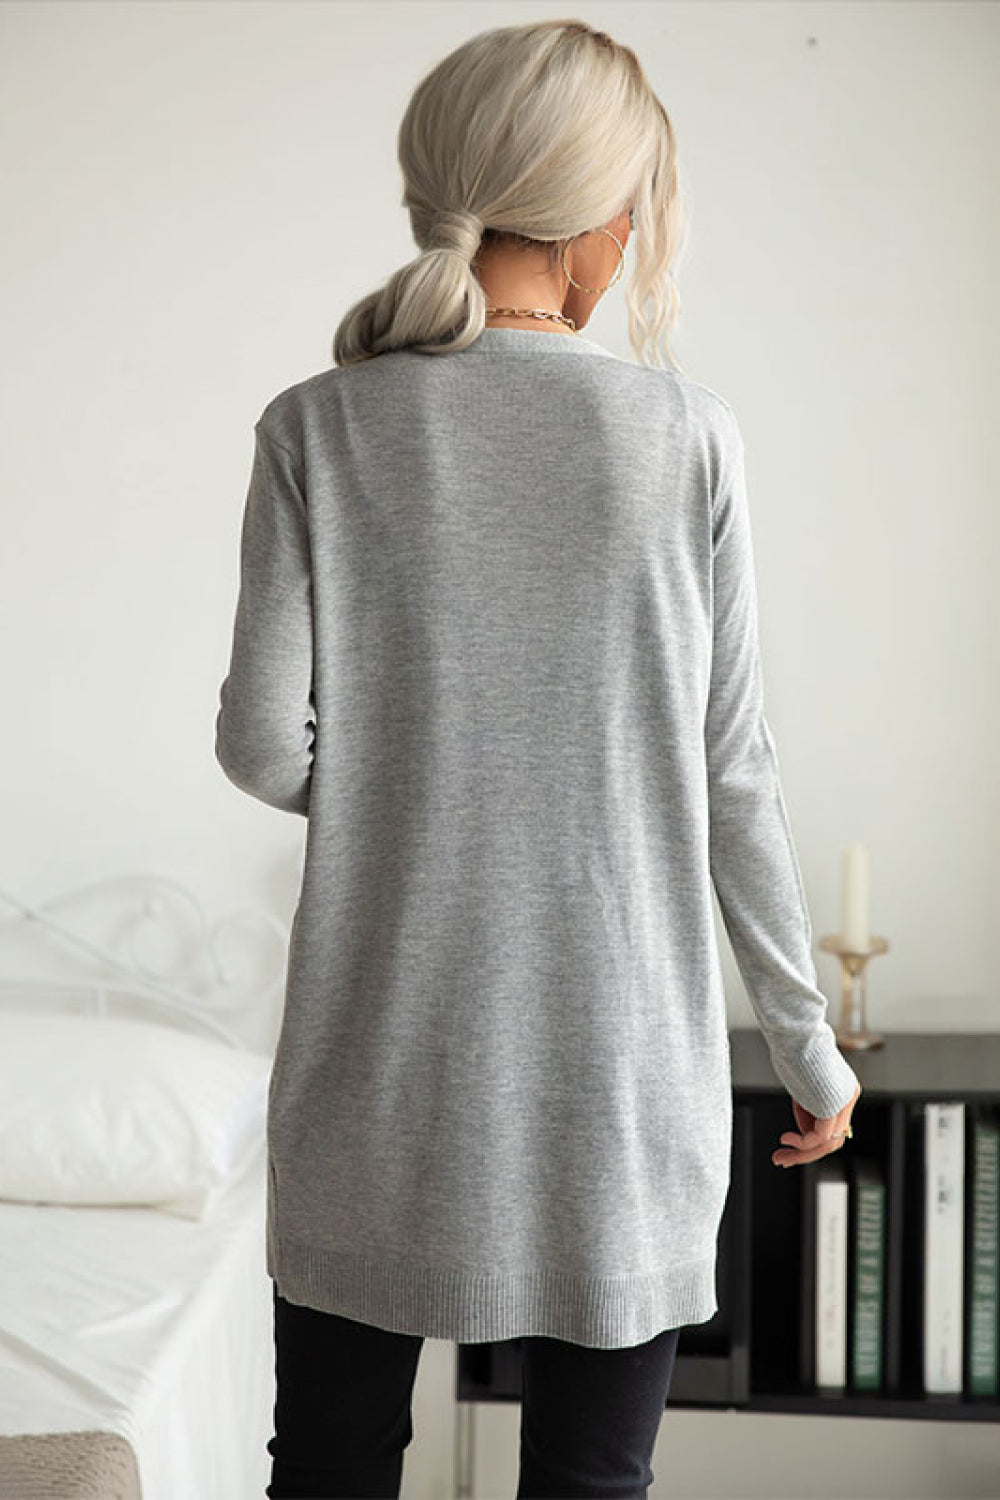 Ribbed Longline Open Front Cardigan